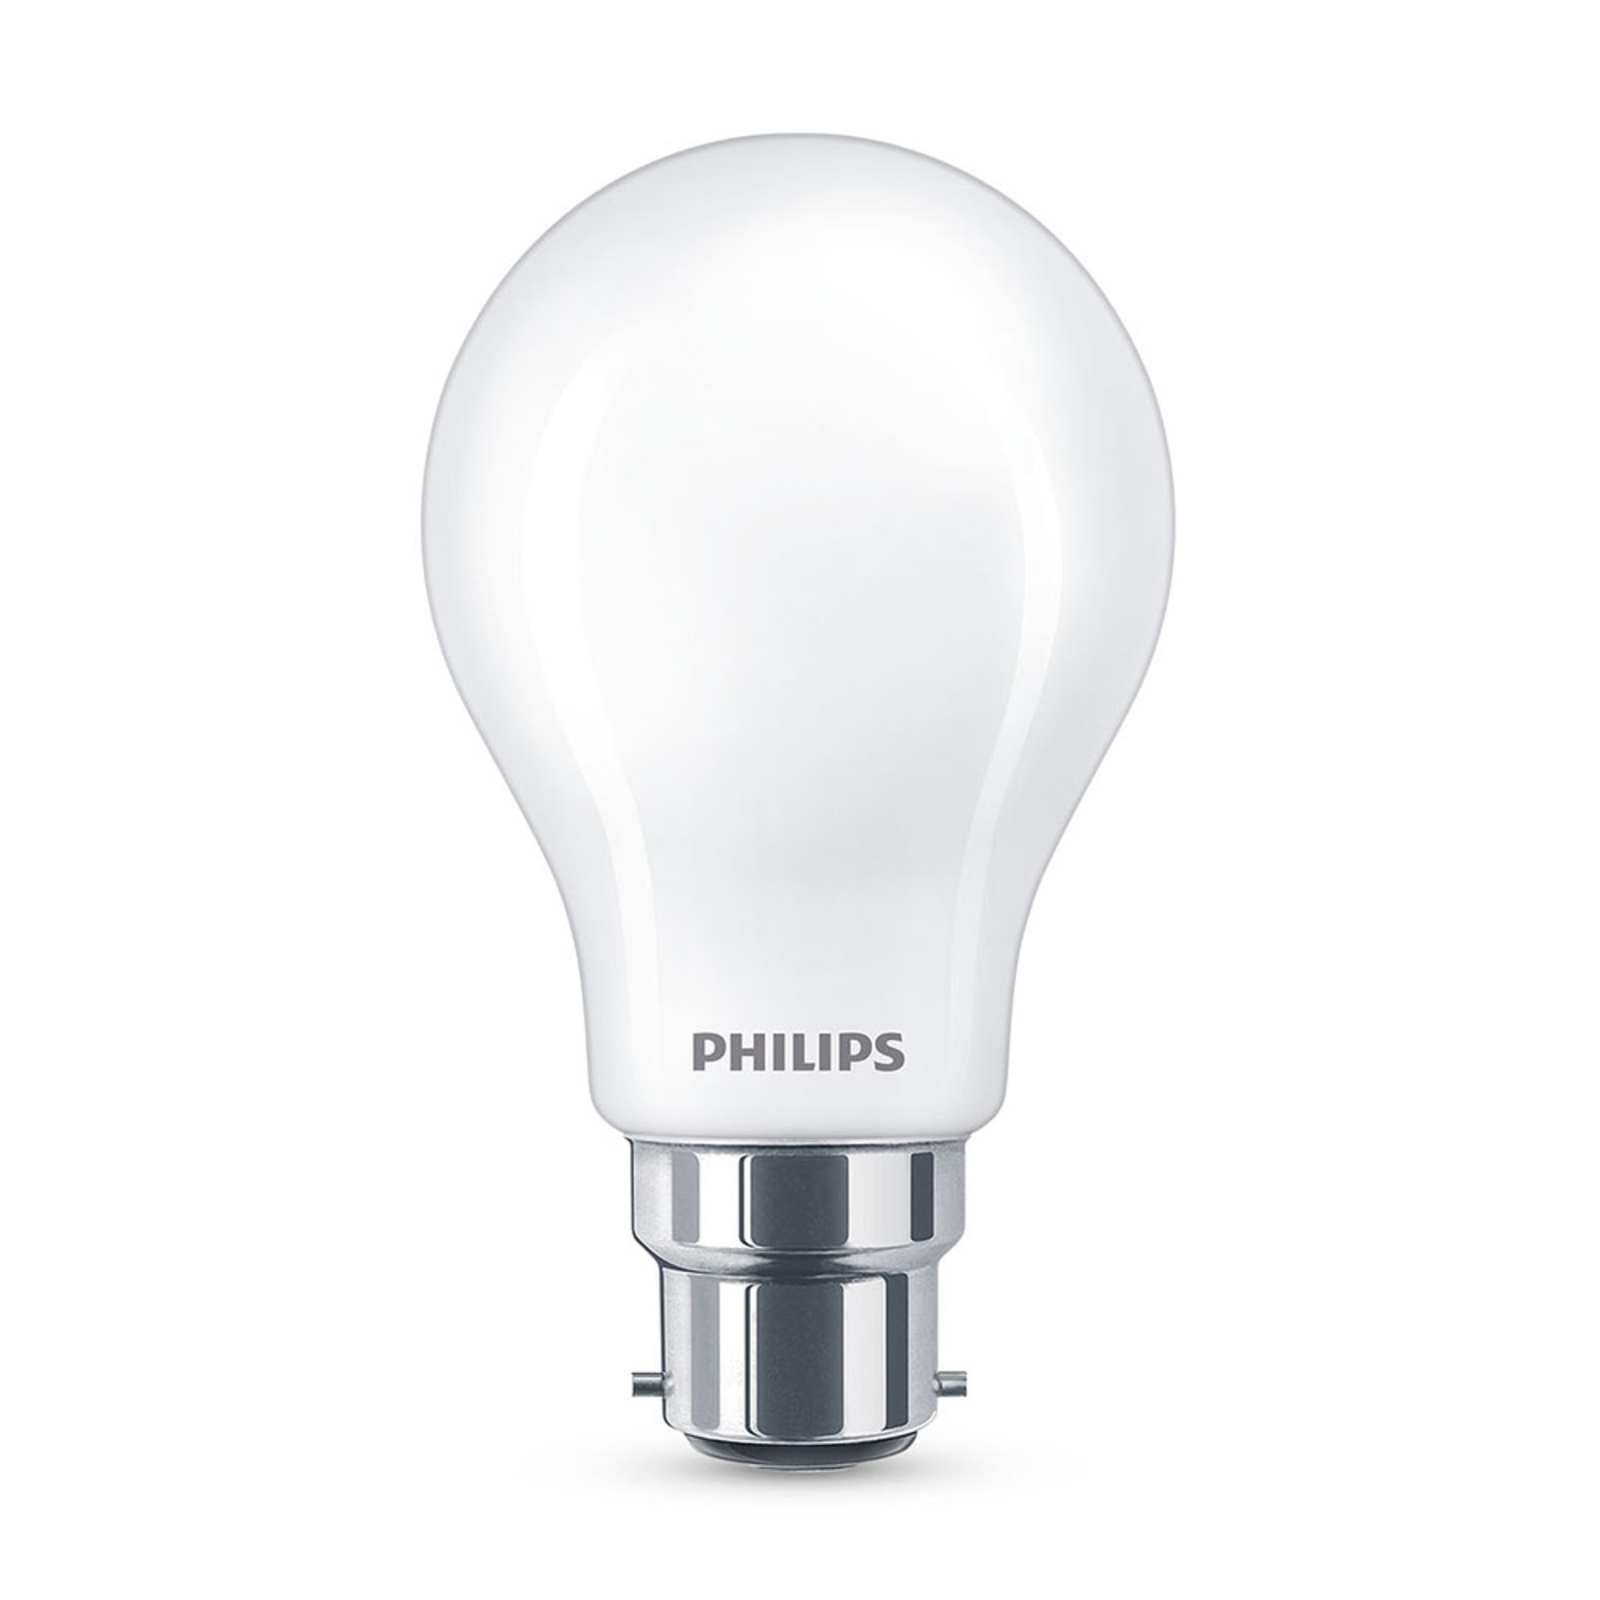 Celsius feedback Competitief Philips LED lamp Classic B22 A60 7W 2.700K mat | Lampen24.be